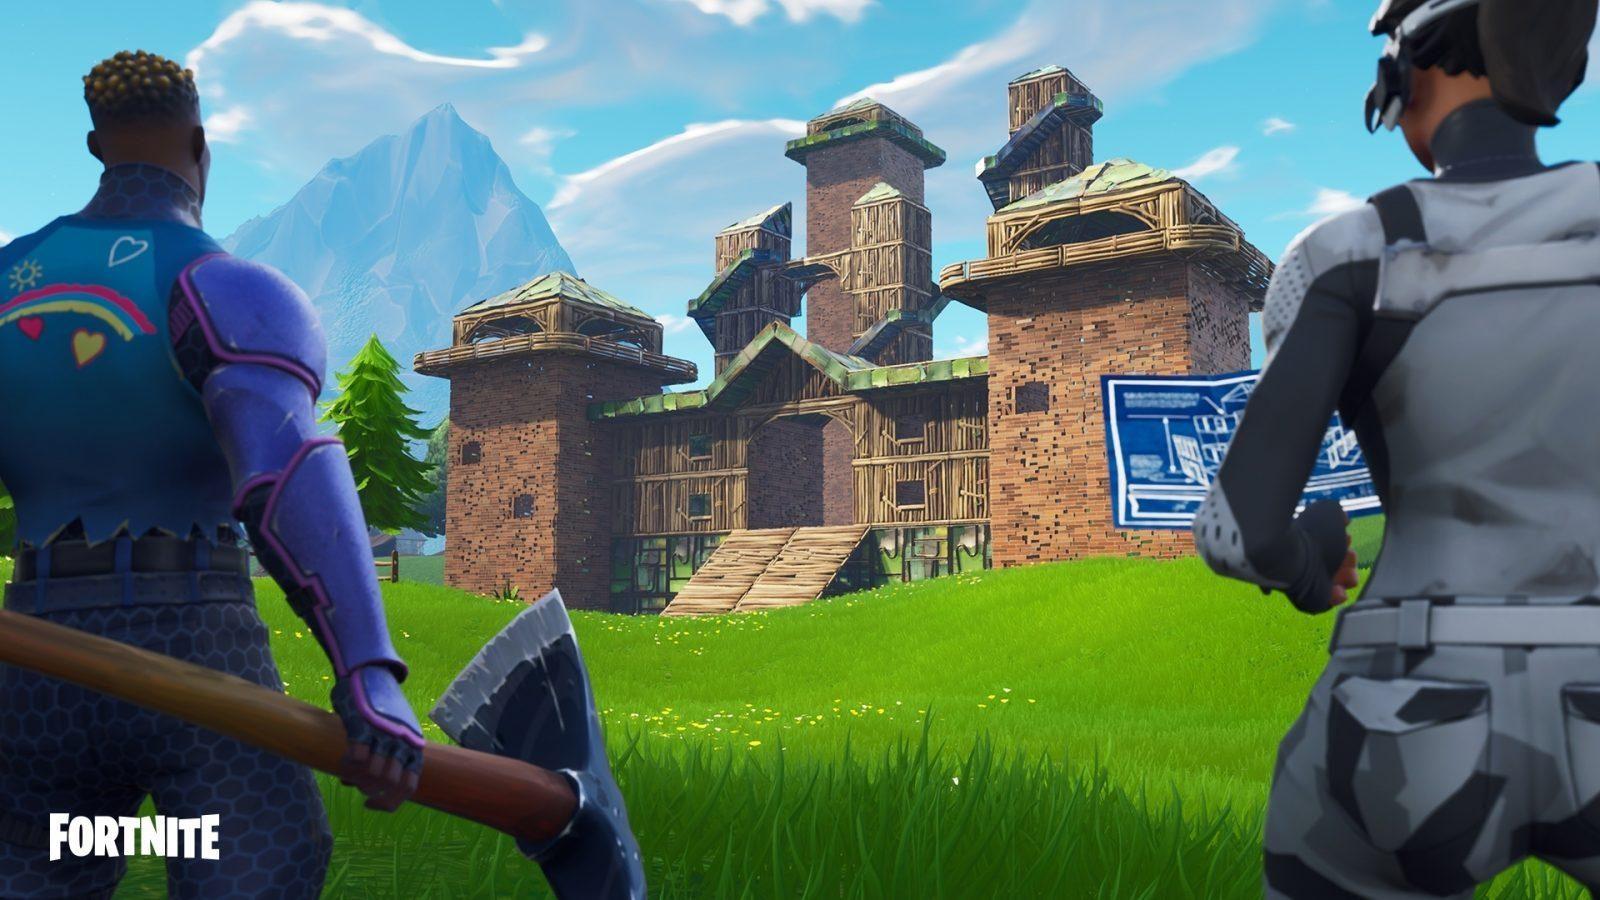 Two fortnite characters looking at building